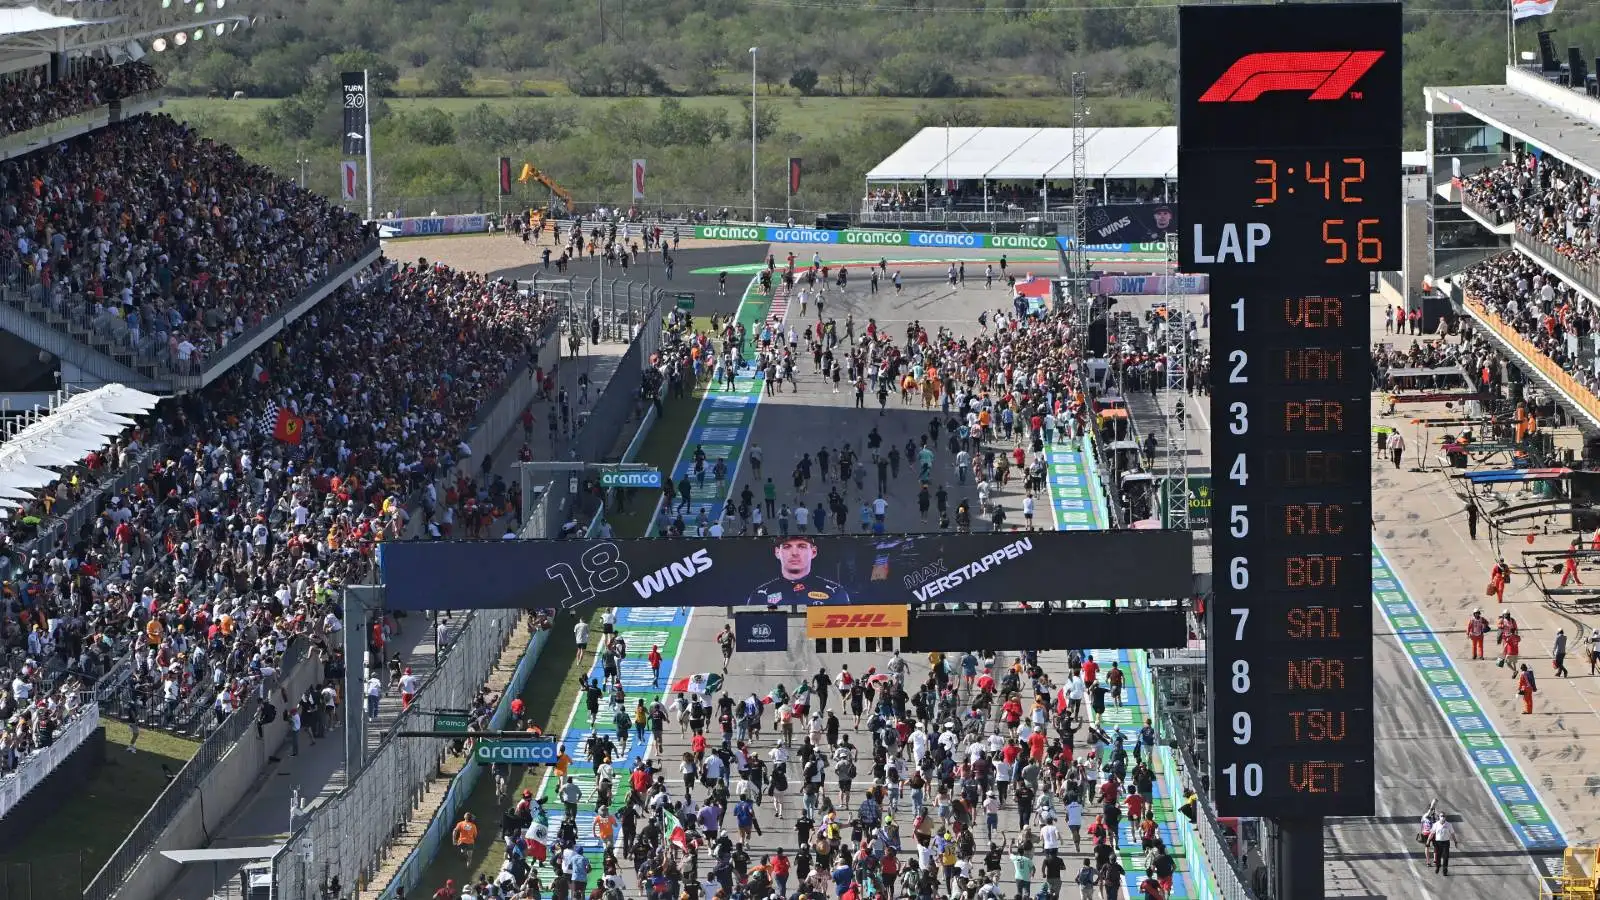 Fans invade the track after the US GP. Austin October 2021.